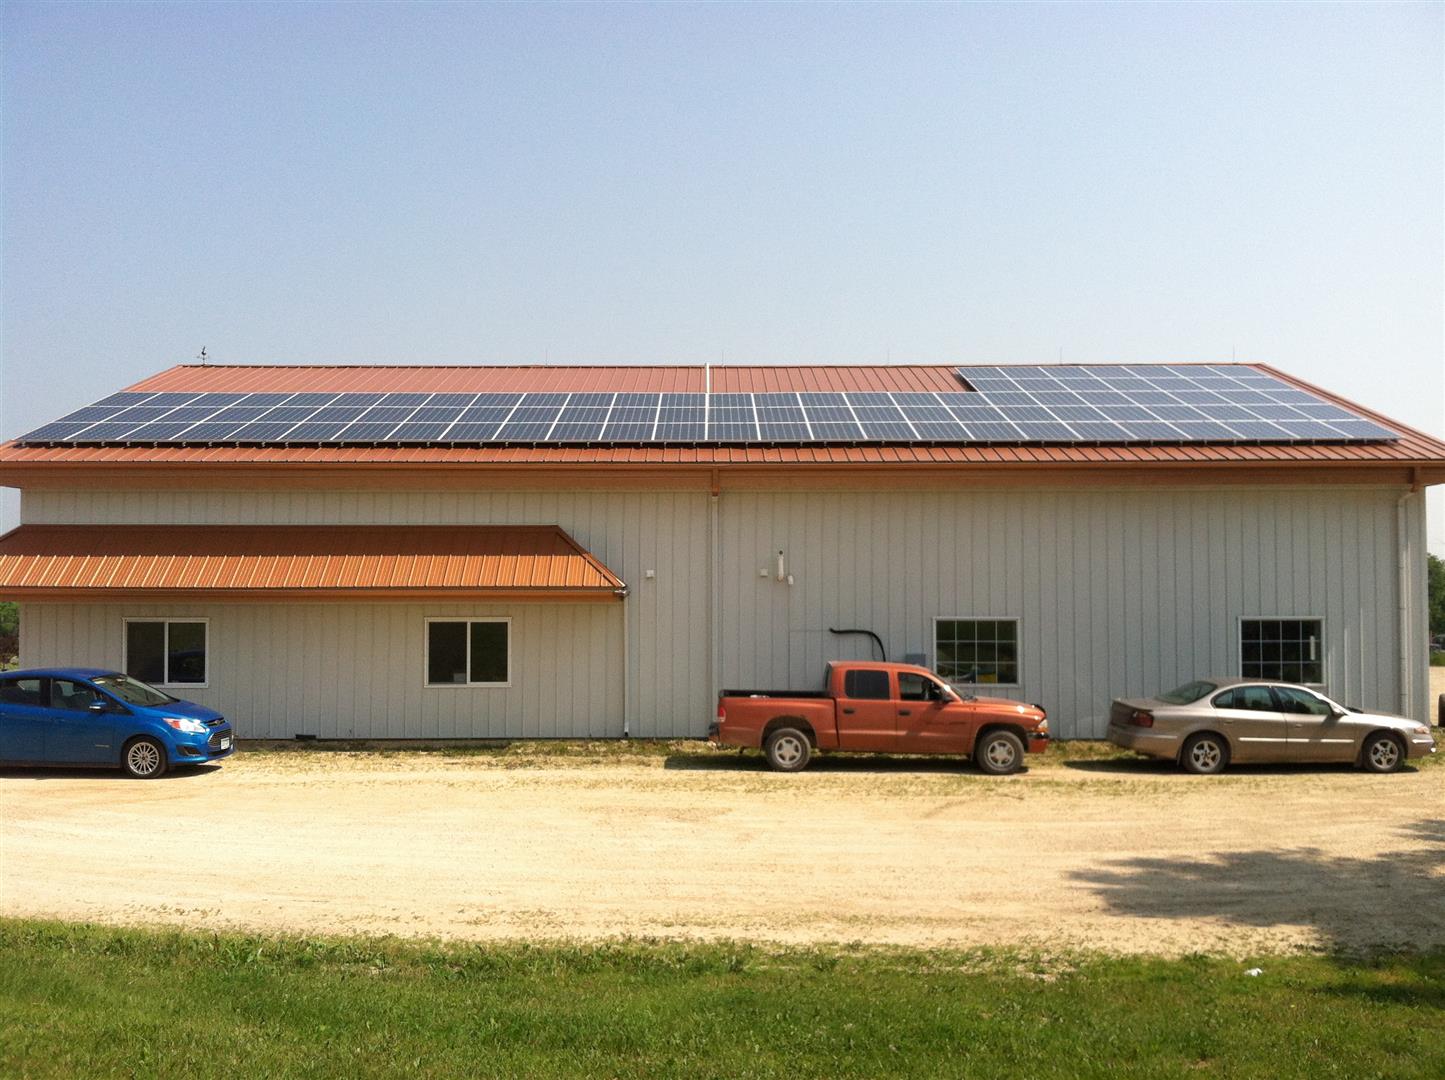 23 kW business and residential system by Zumbro Falls, MN